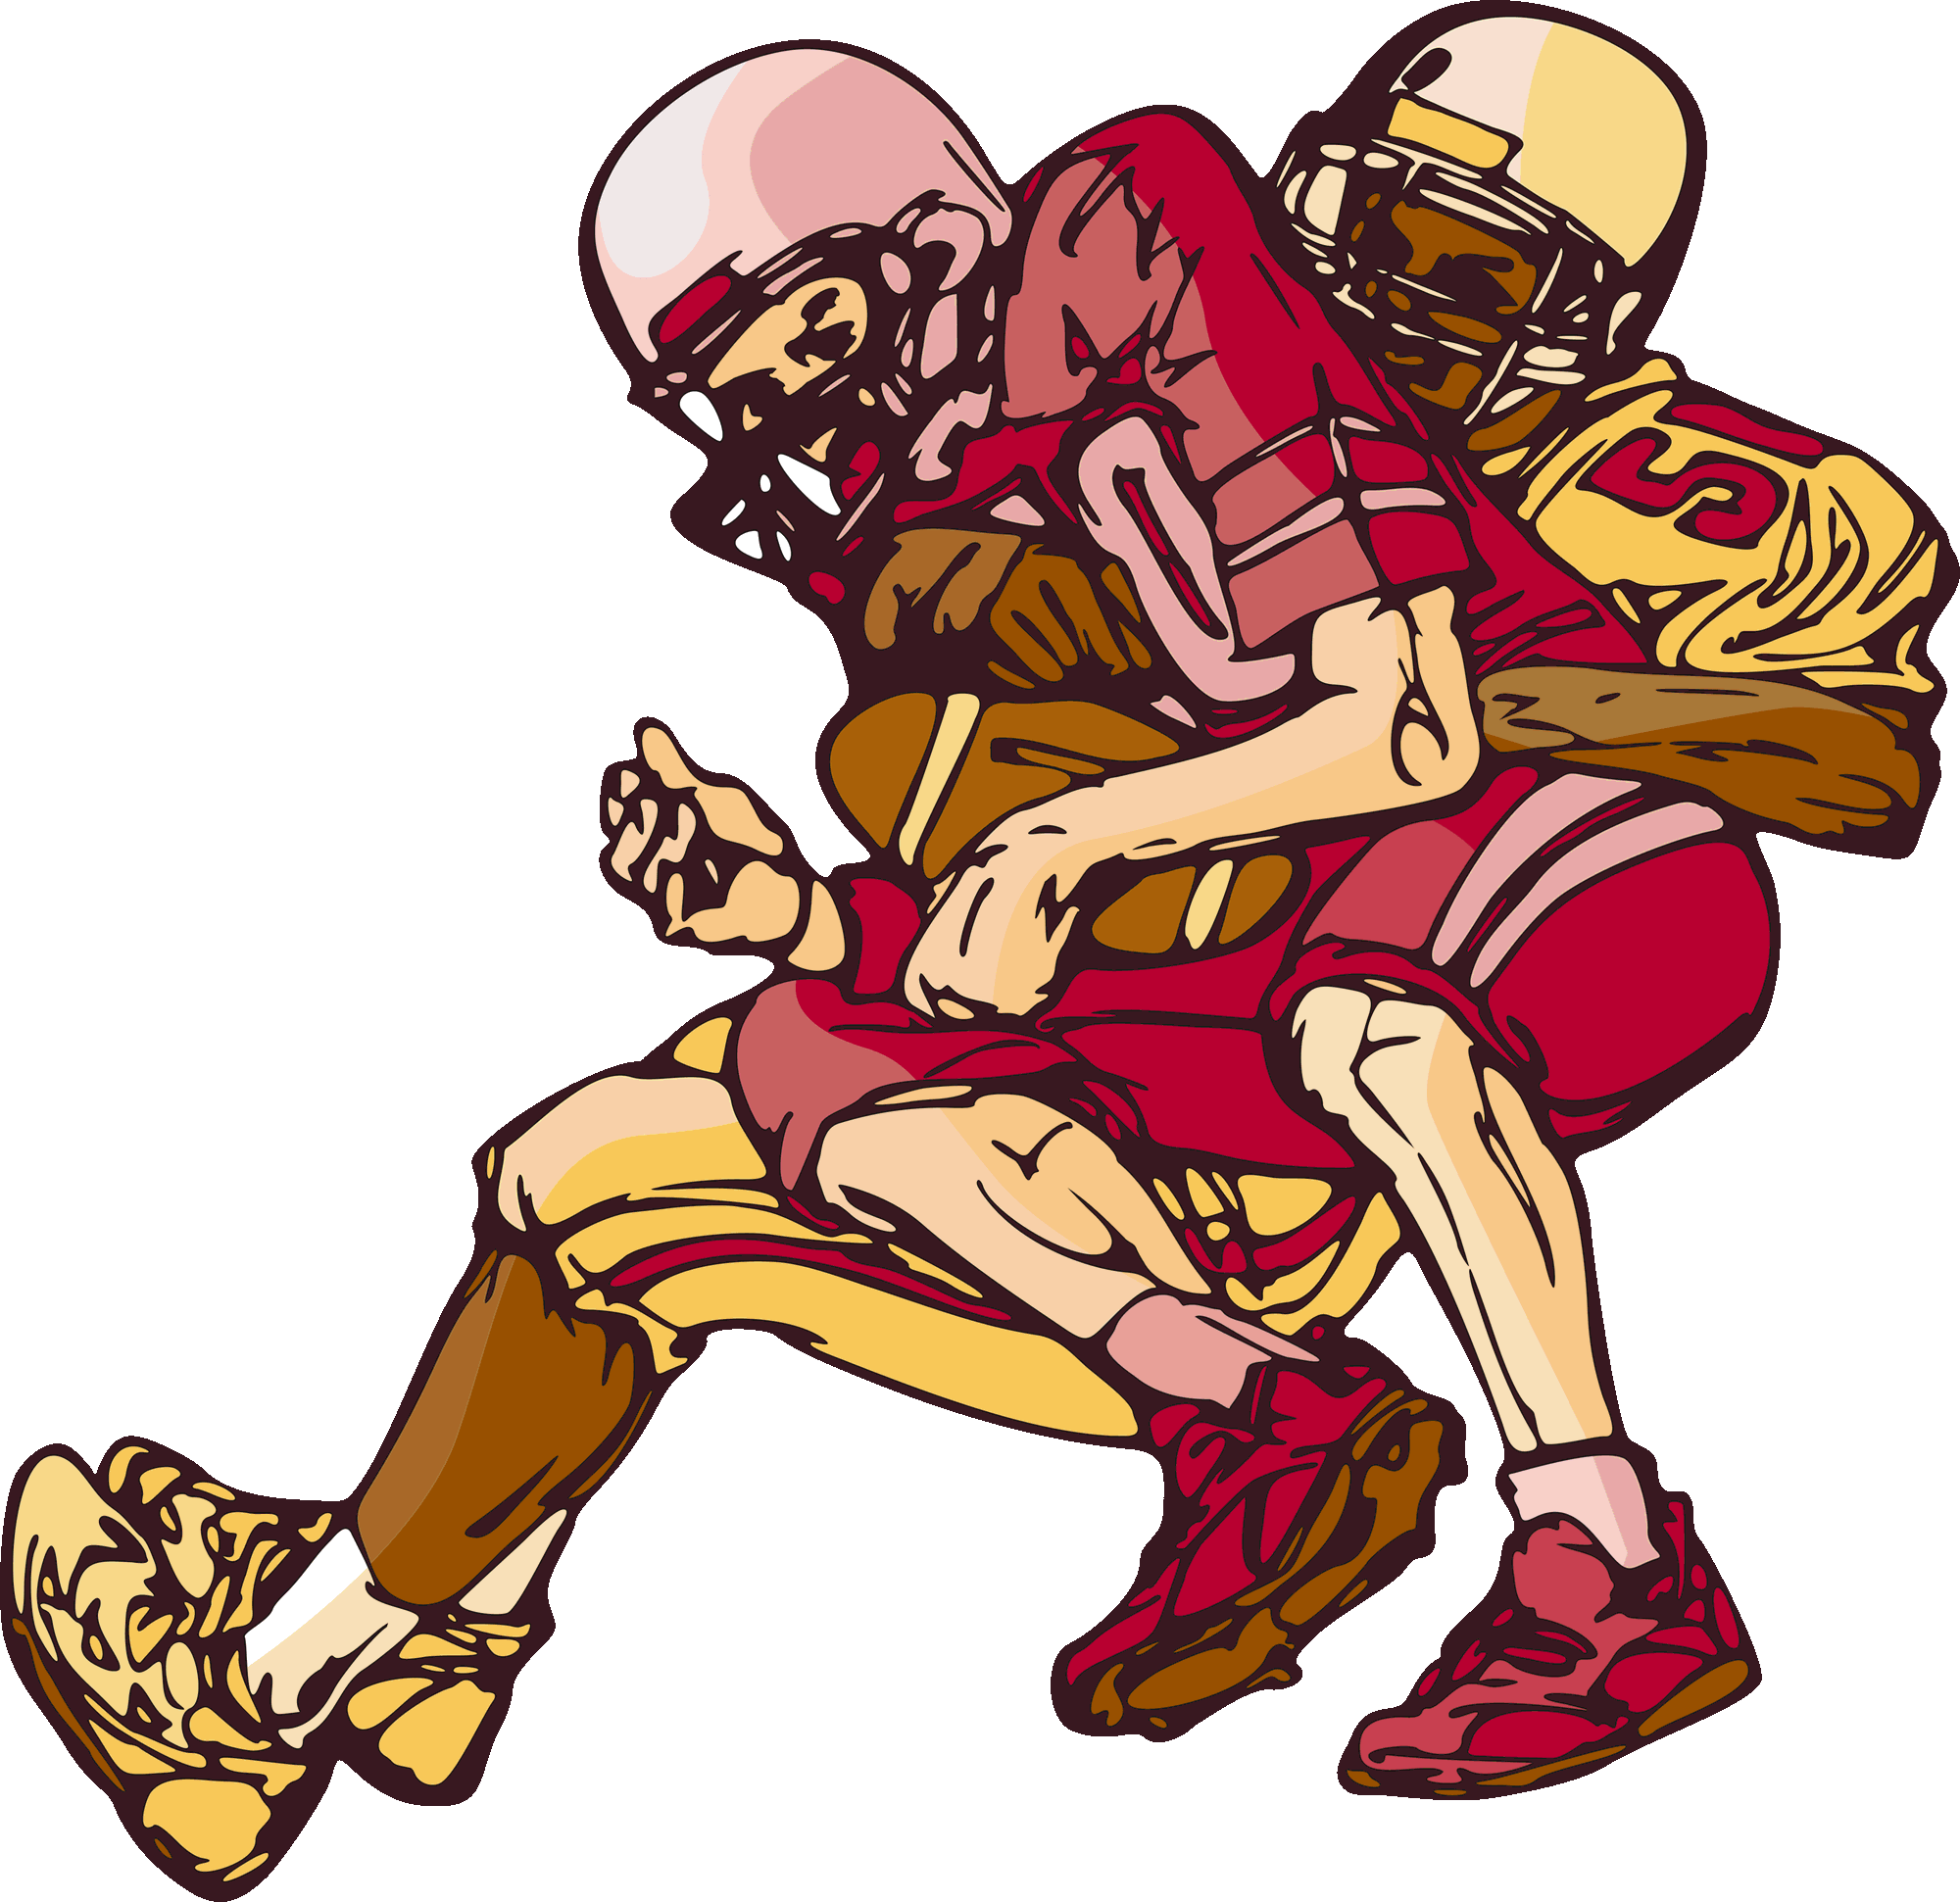 clipart of a football player - photo #33